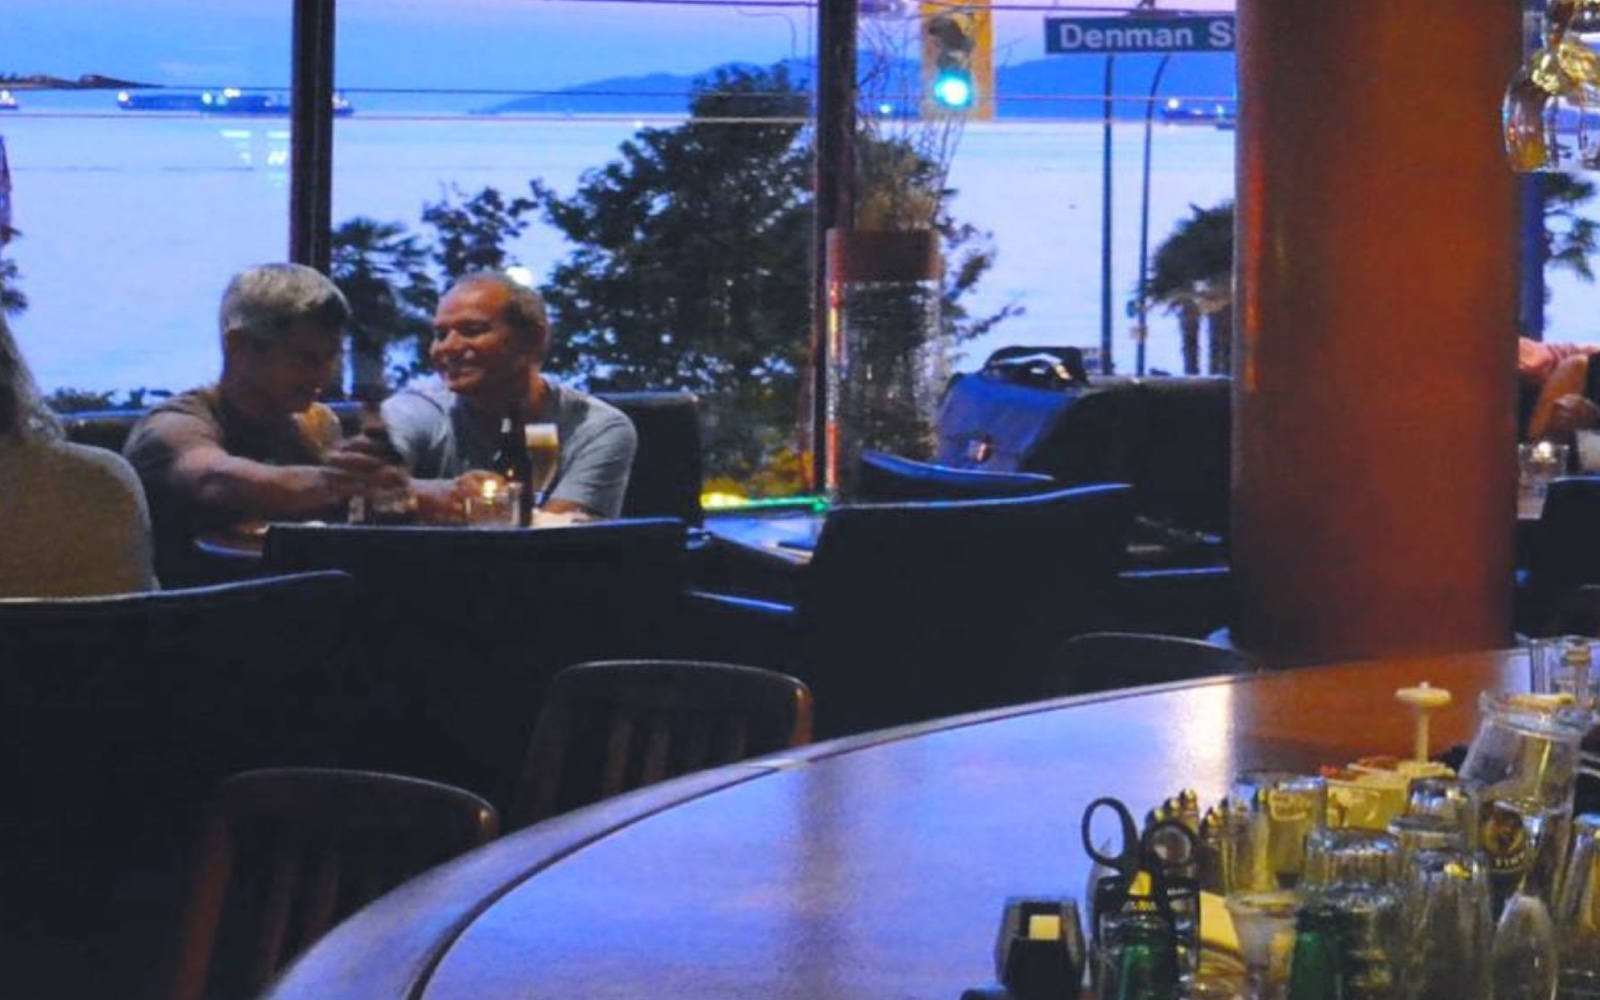 The view of English Bay from the Bayside Lounge, Vancouver